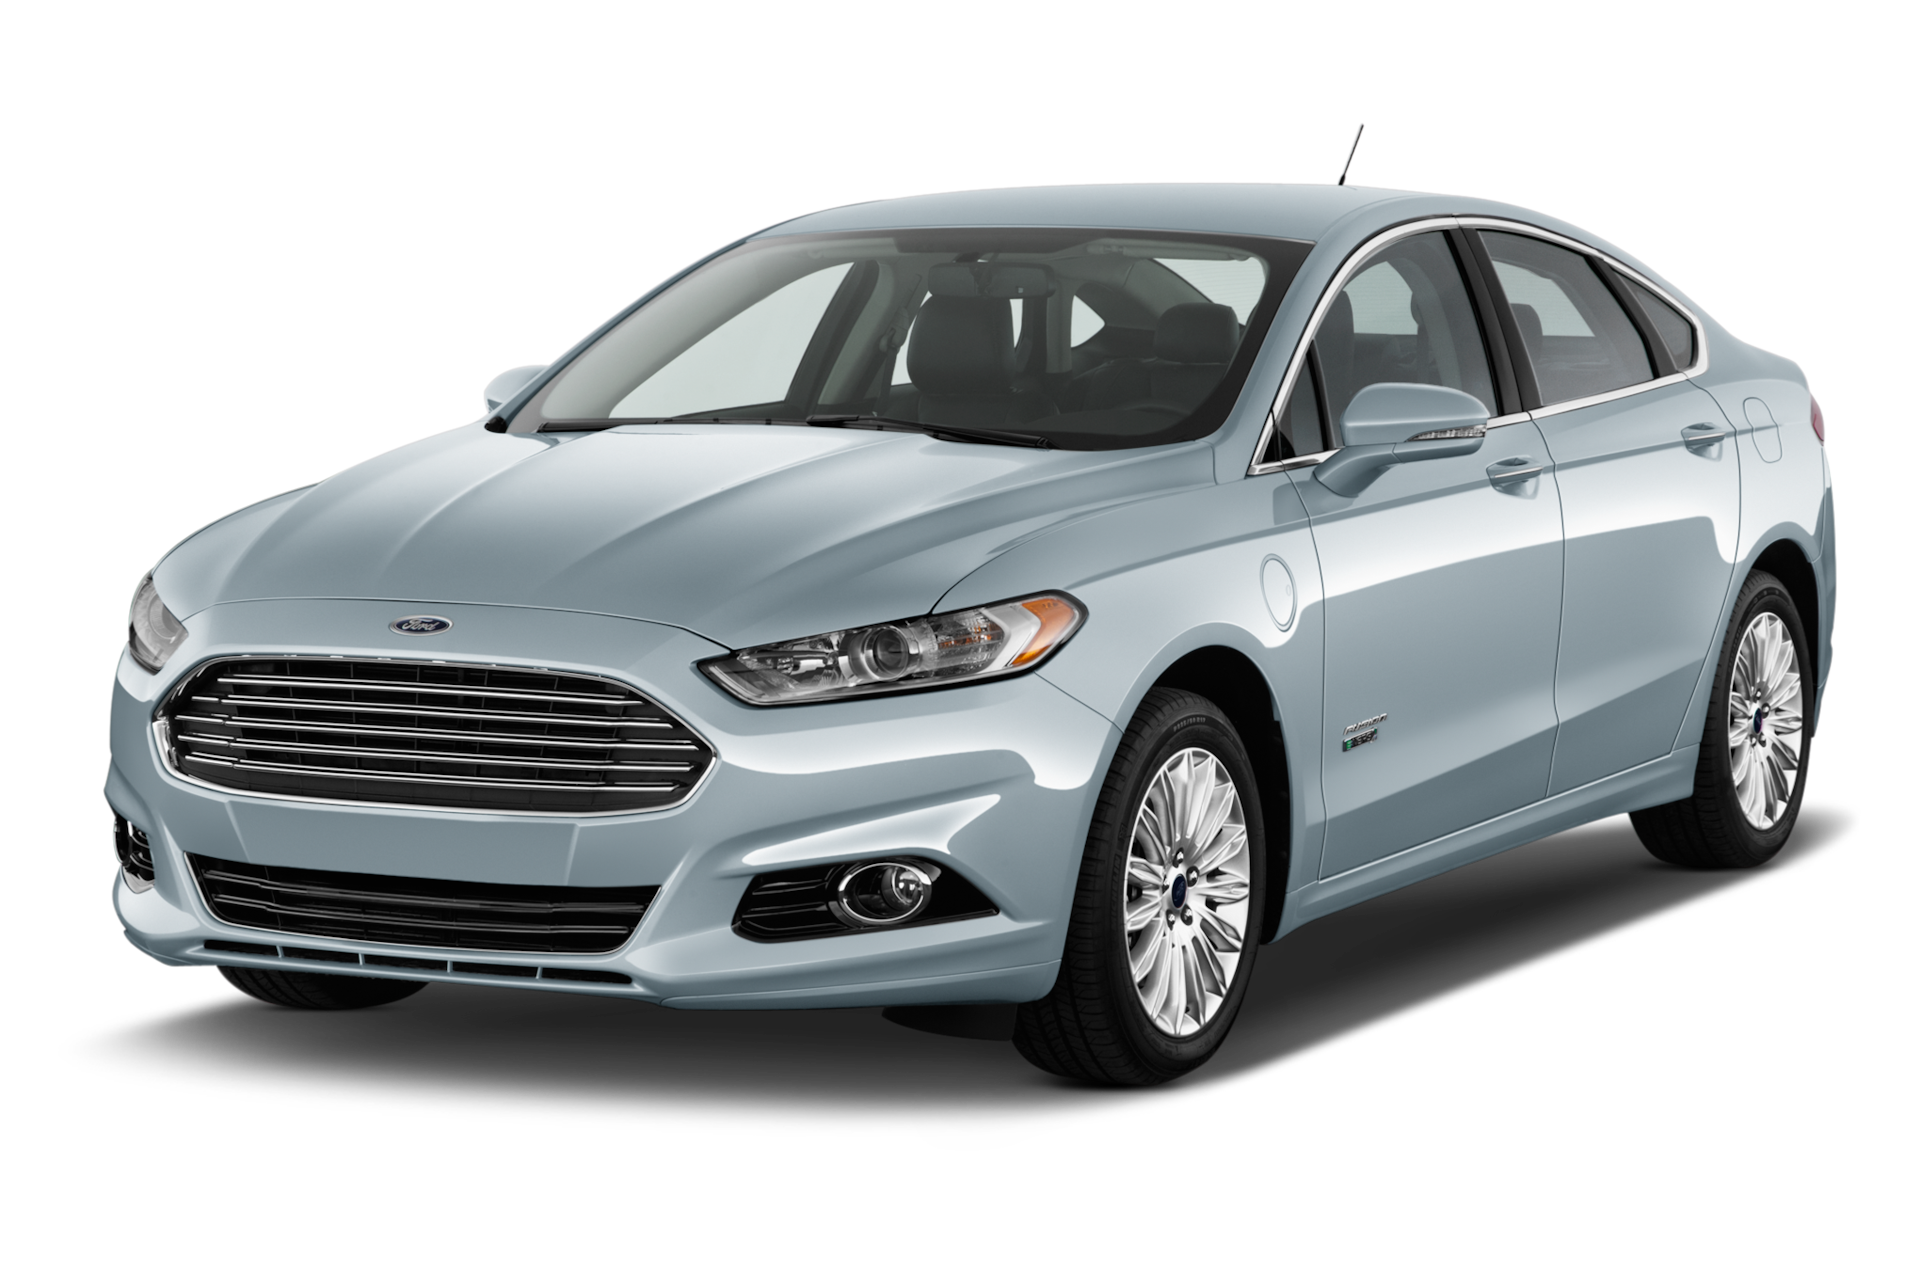 2016 Ford Fusion Energi Prices, Reviews, and Photos - MotorTrend